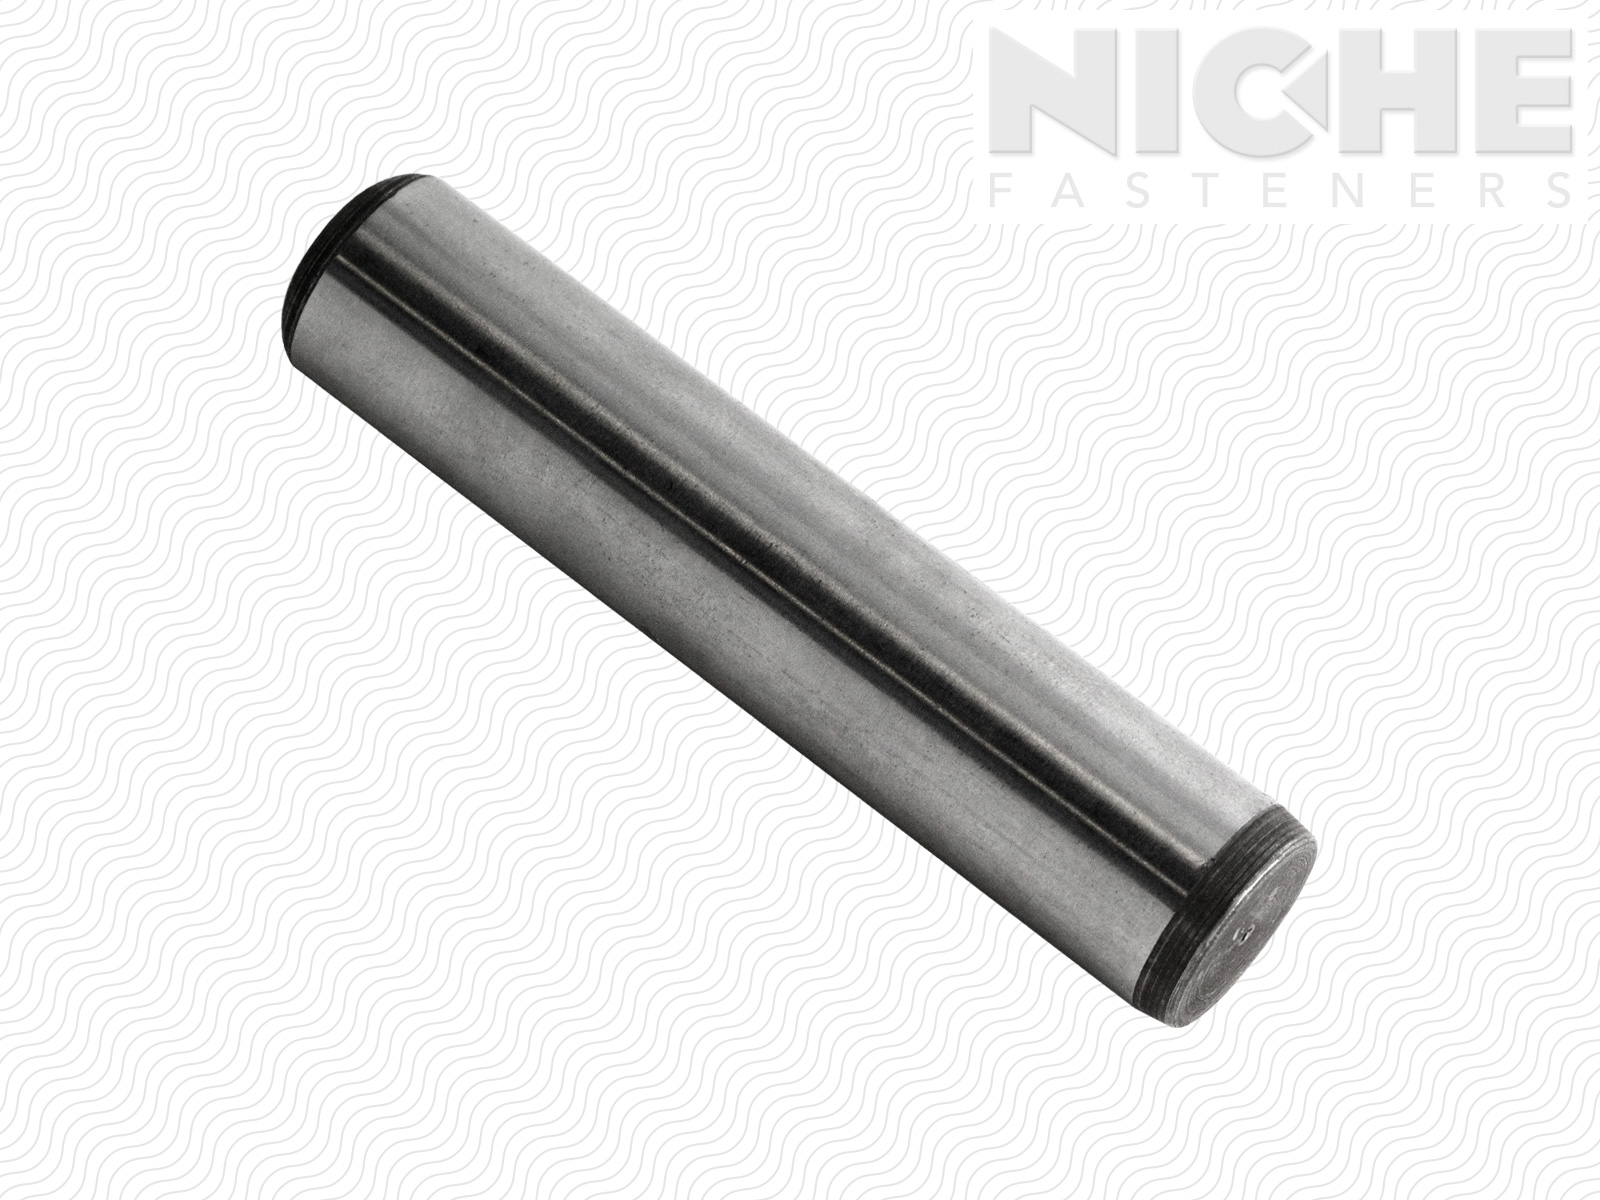 1/8" x 1/2" Dowel Pin Hardened And Ground Stainless Steel 416 